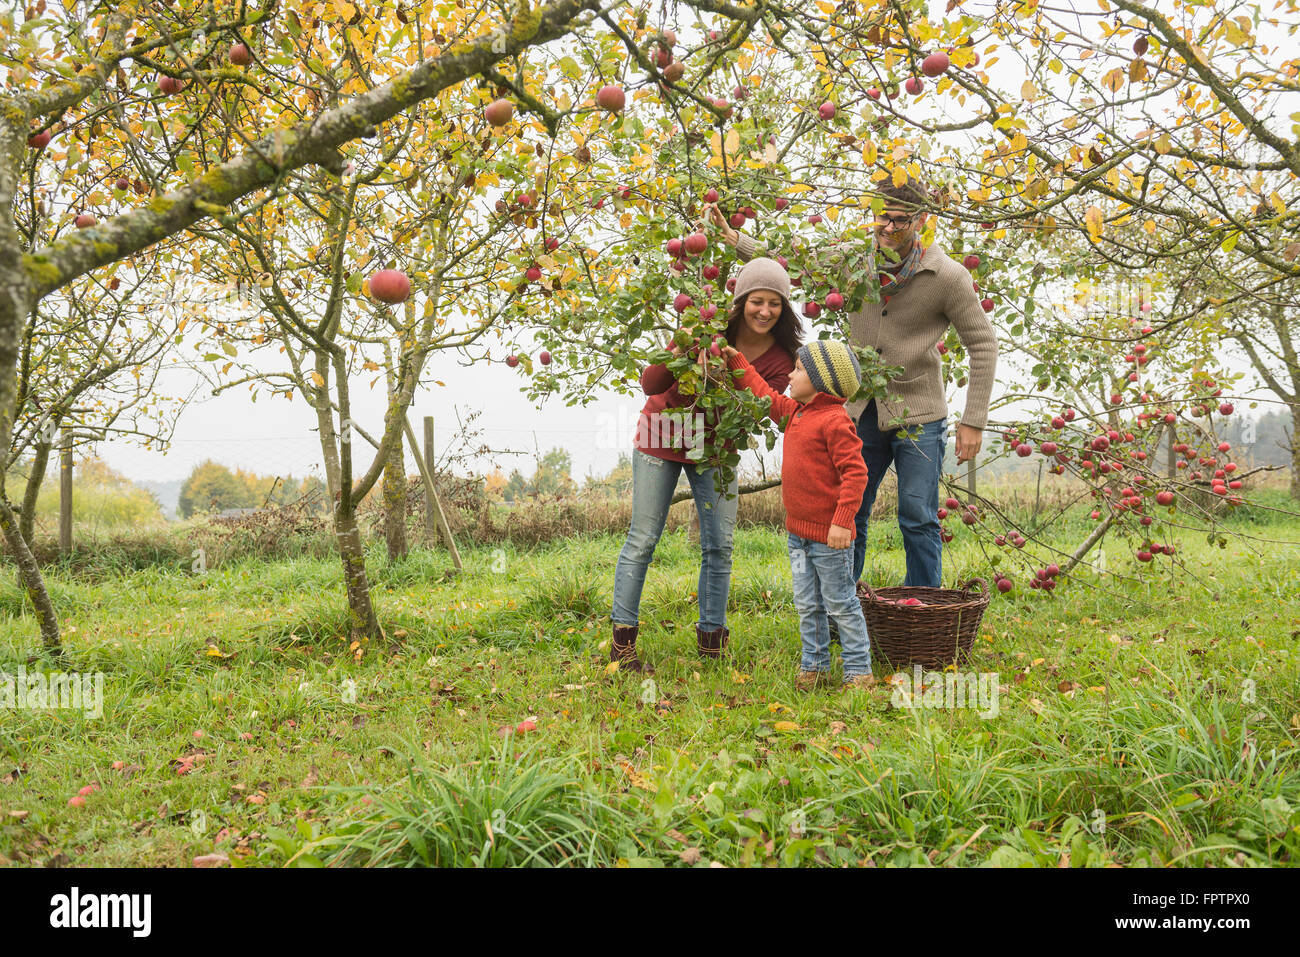 Family picking apples from apple tree in an apple orchard, Bavaria, Germany Stock Photo